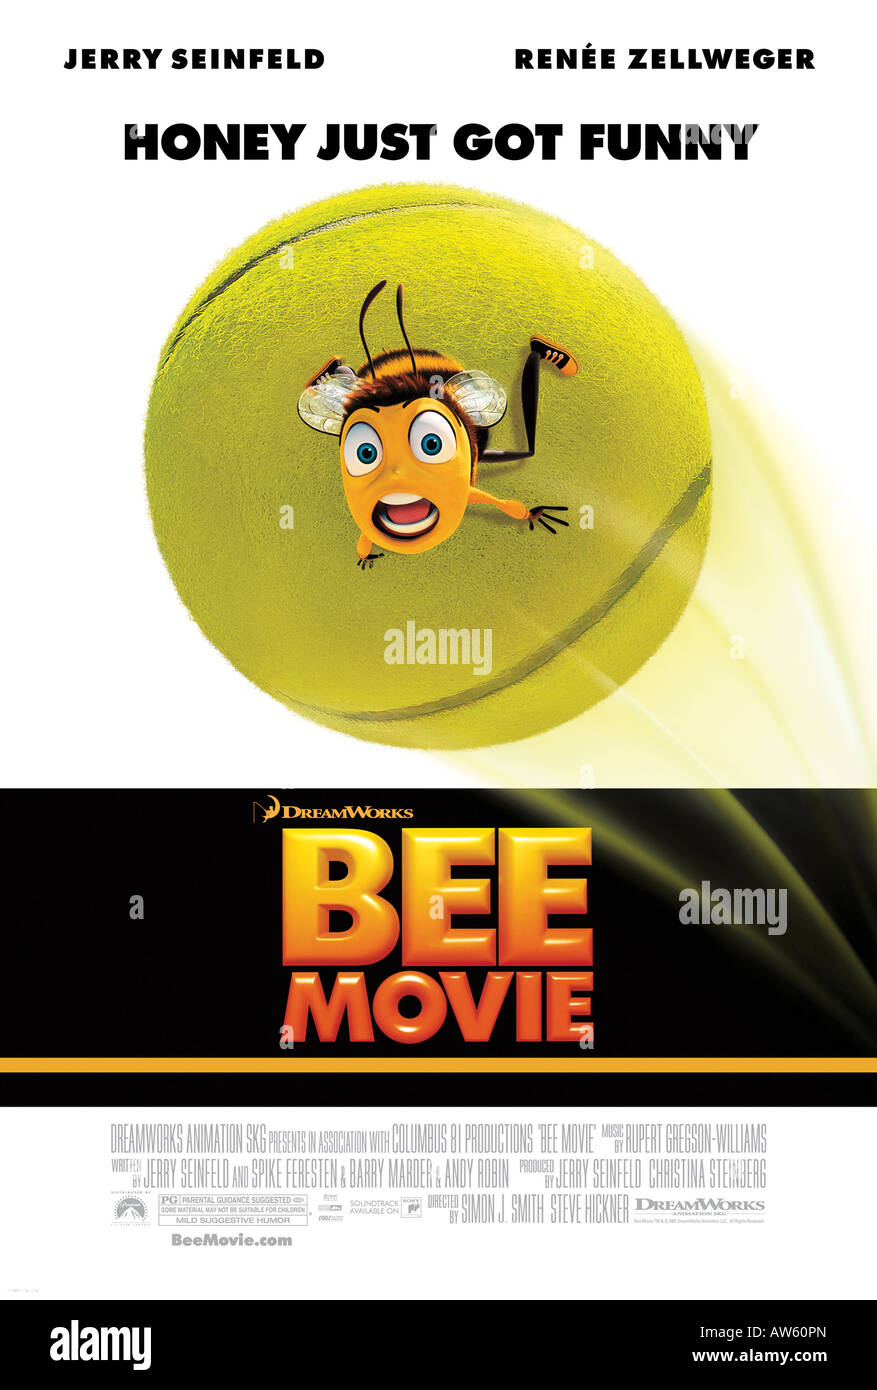 BEE MOVIE  poster for 2007 Dreamworks Animation SKG film with Barry B Benson voiced by Jerry Seinfeld who co produced the film Stock Photo